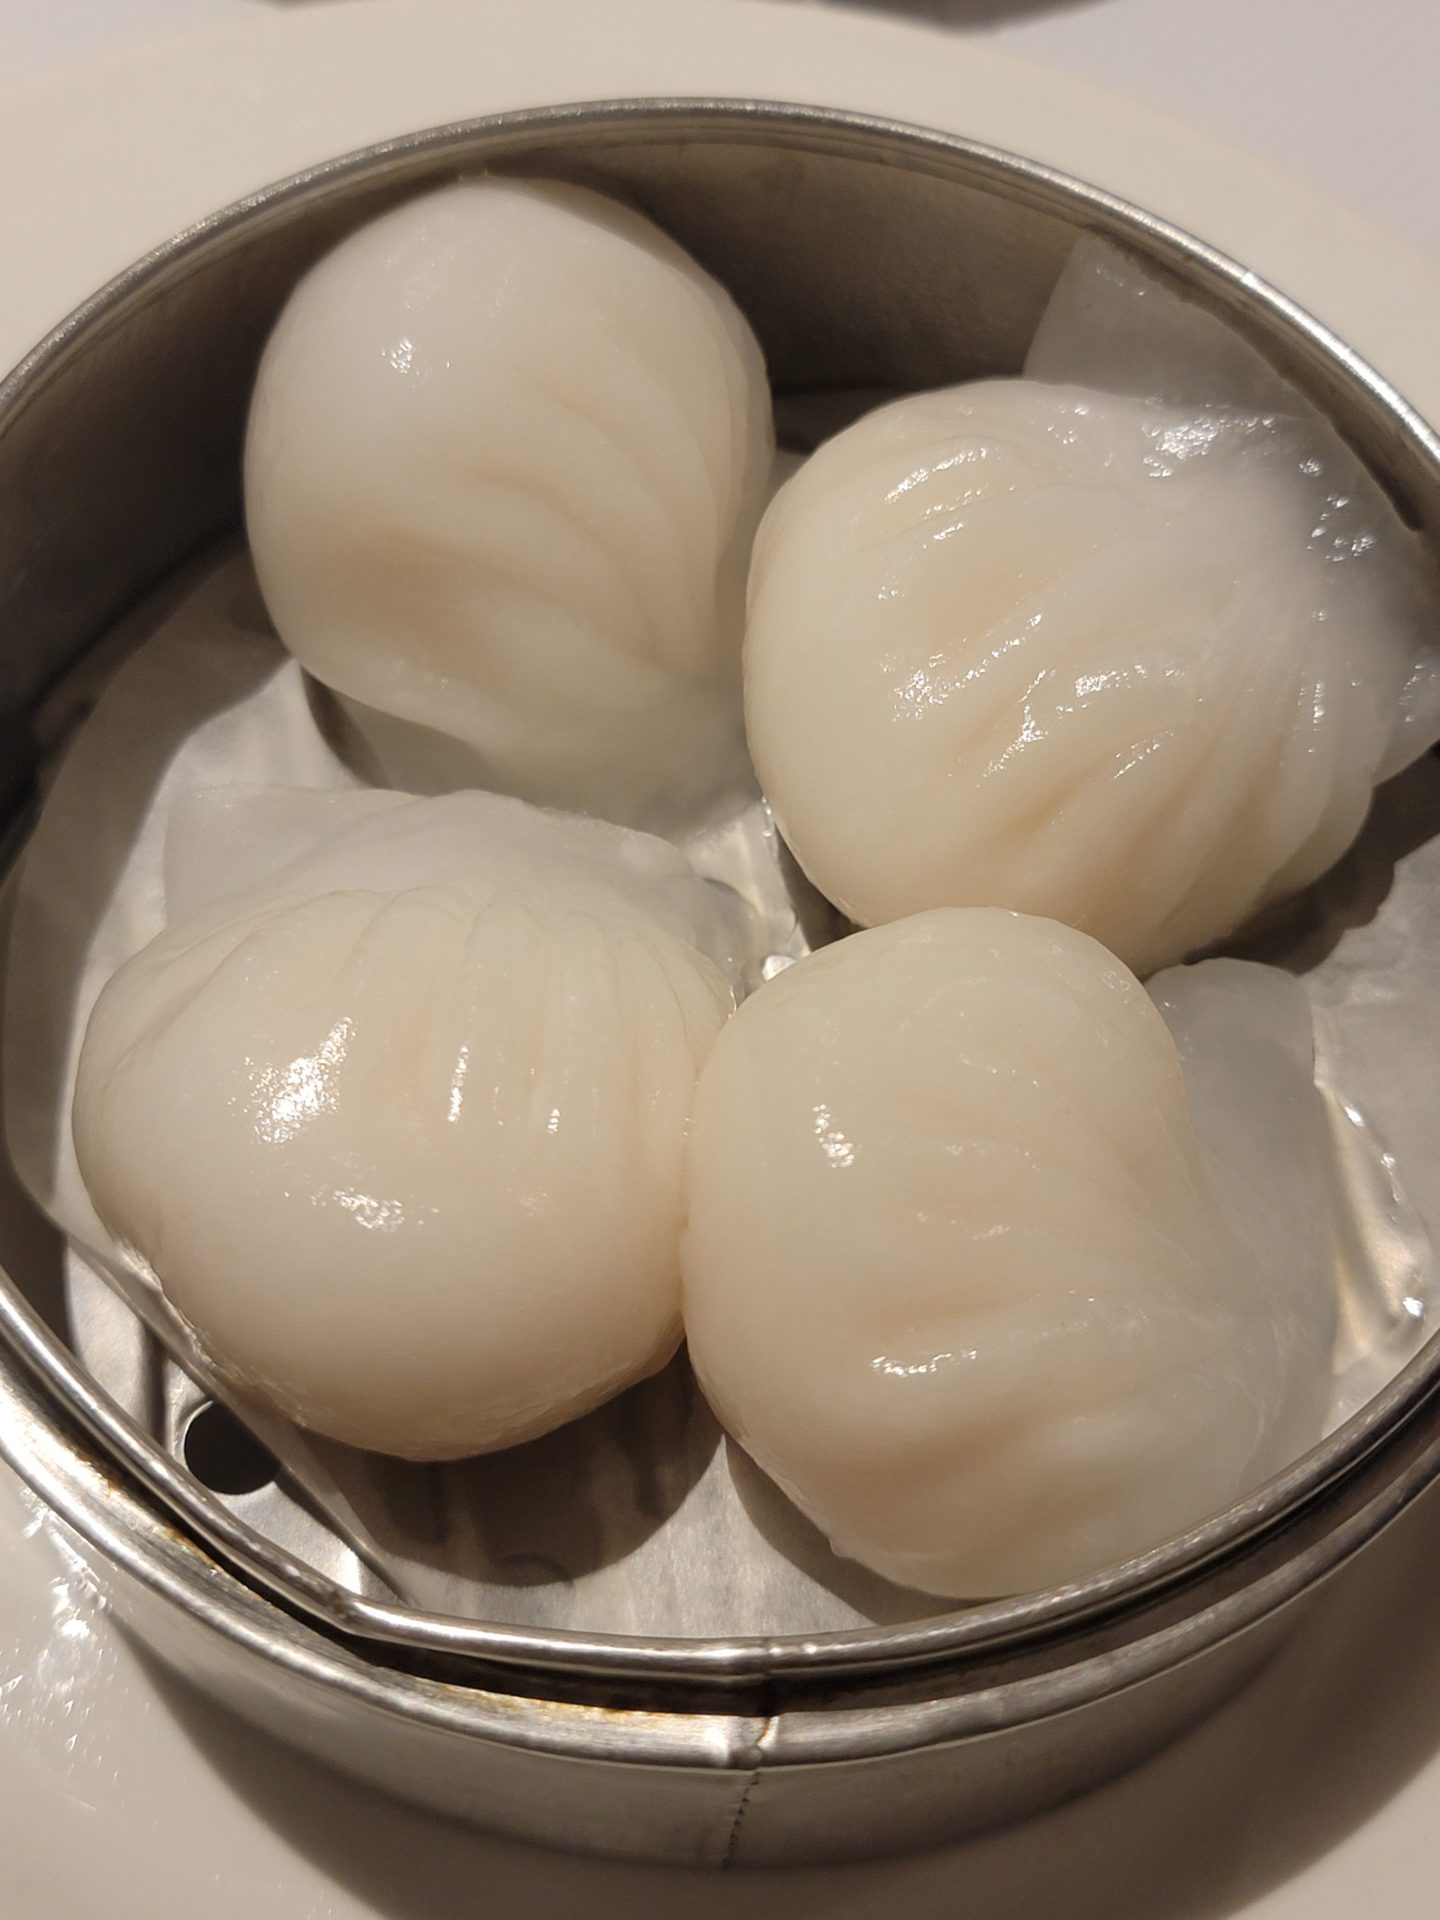 a group of dumplings in a container